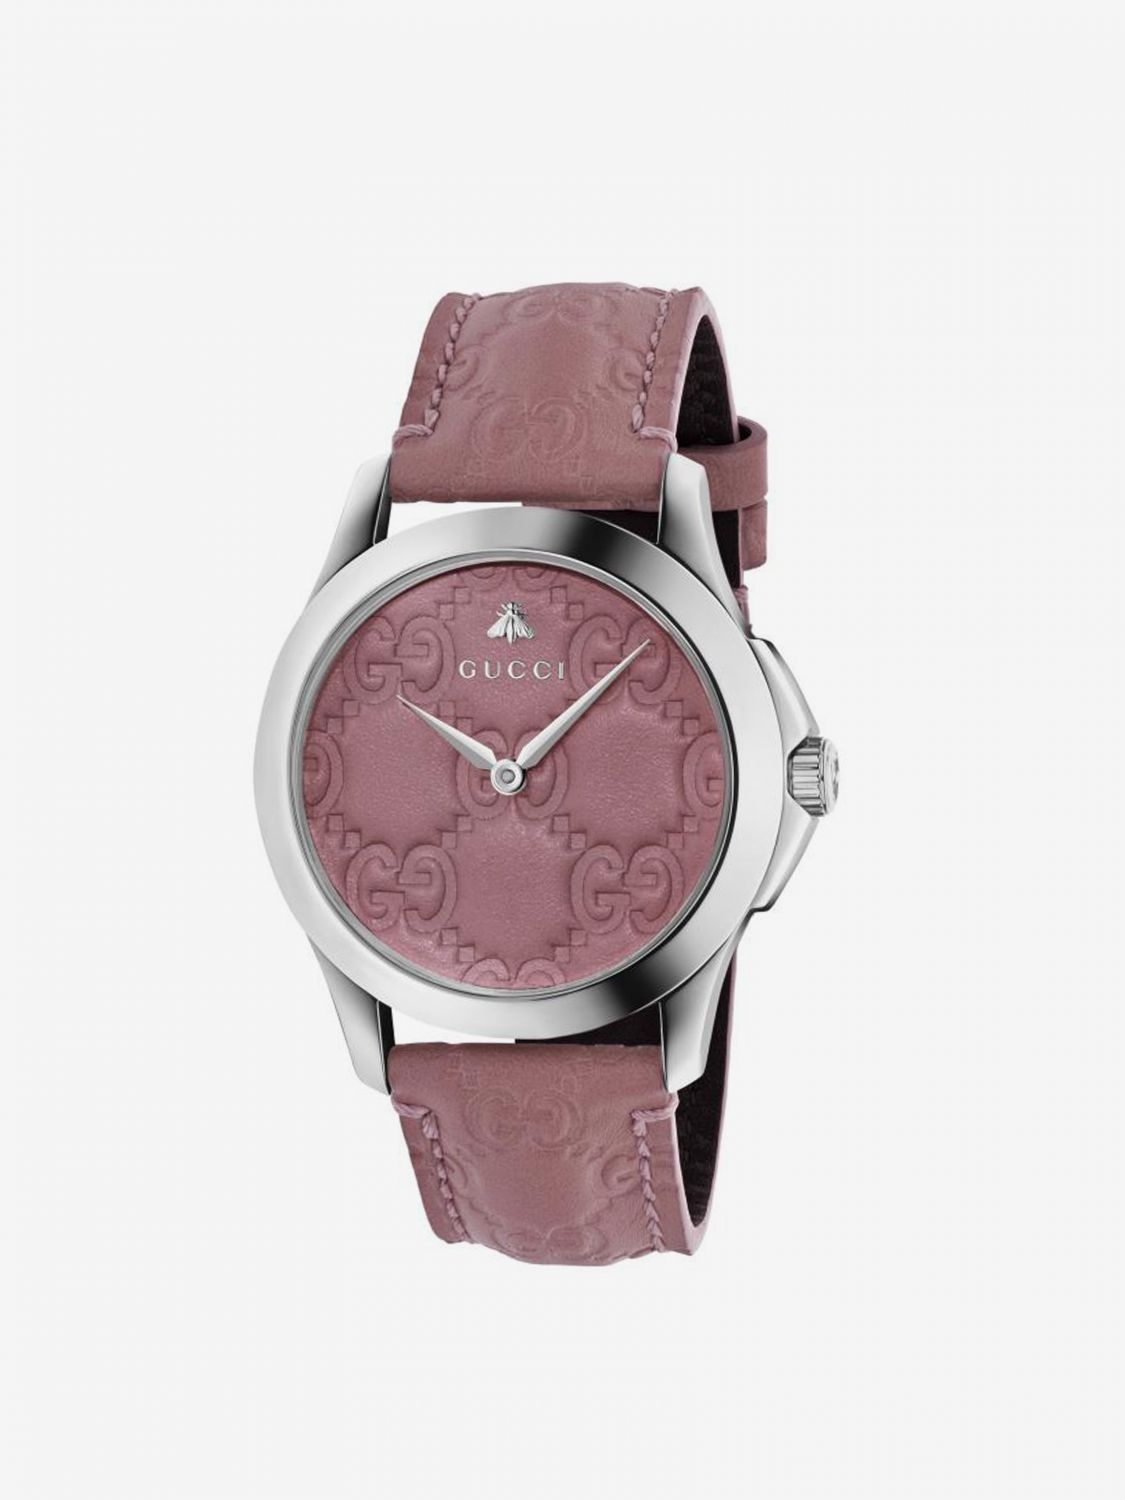 G-Timeless watch case 38 mm with the engraved GG monogram - 1